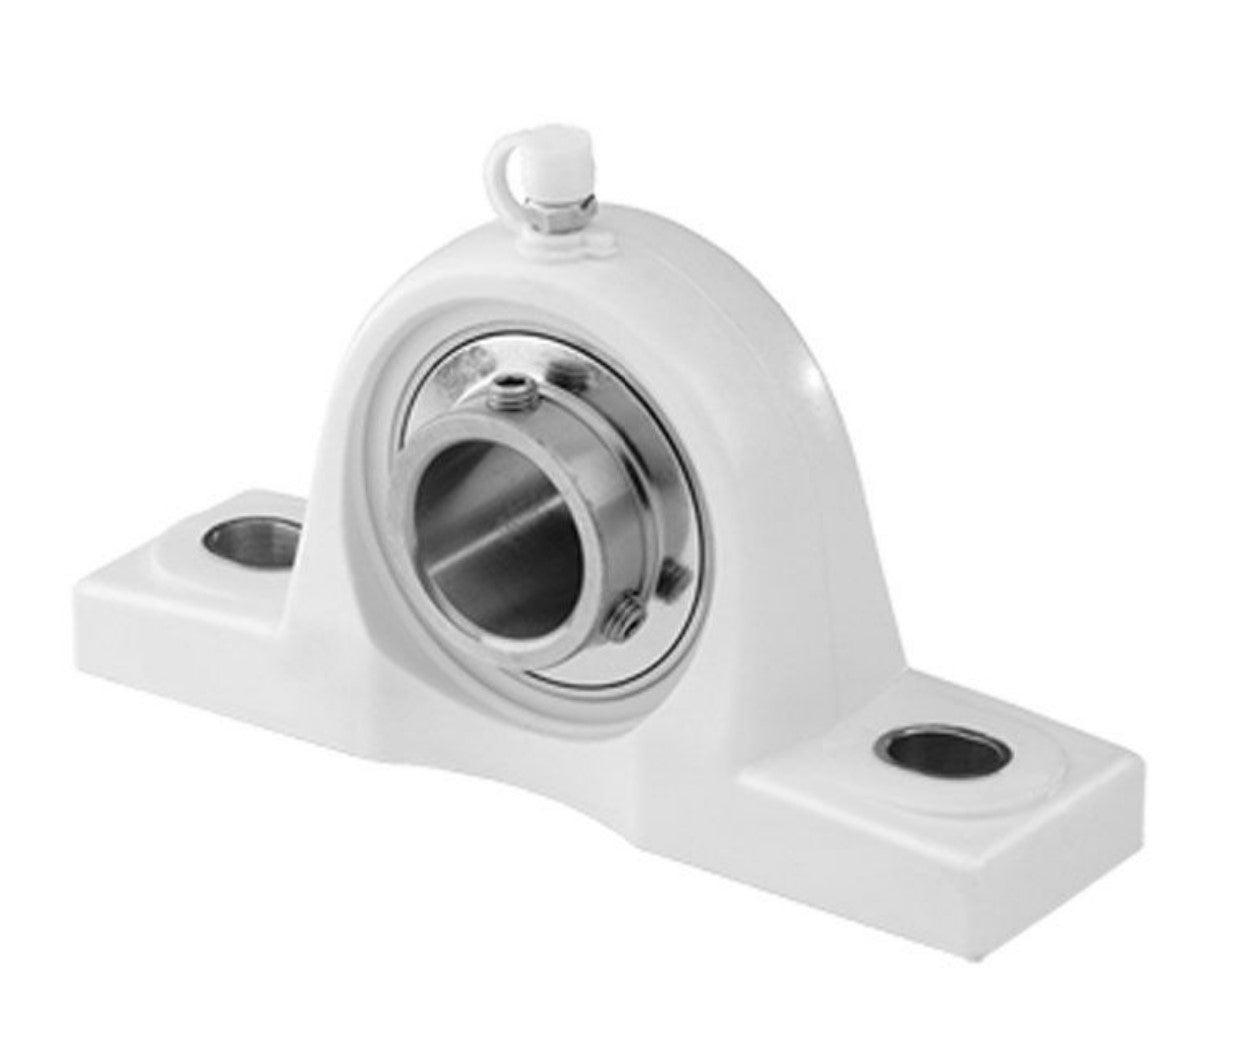 Thermoplastic Pillow Block 1-1/4" Shaft Stainless with Set Screws | PPL207-SSUC207 - Forces Inc